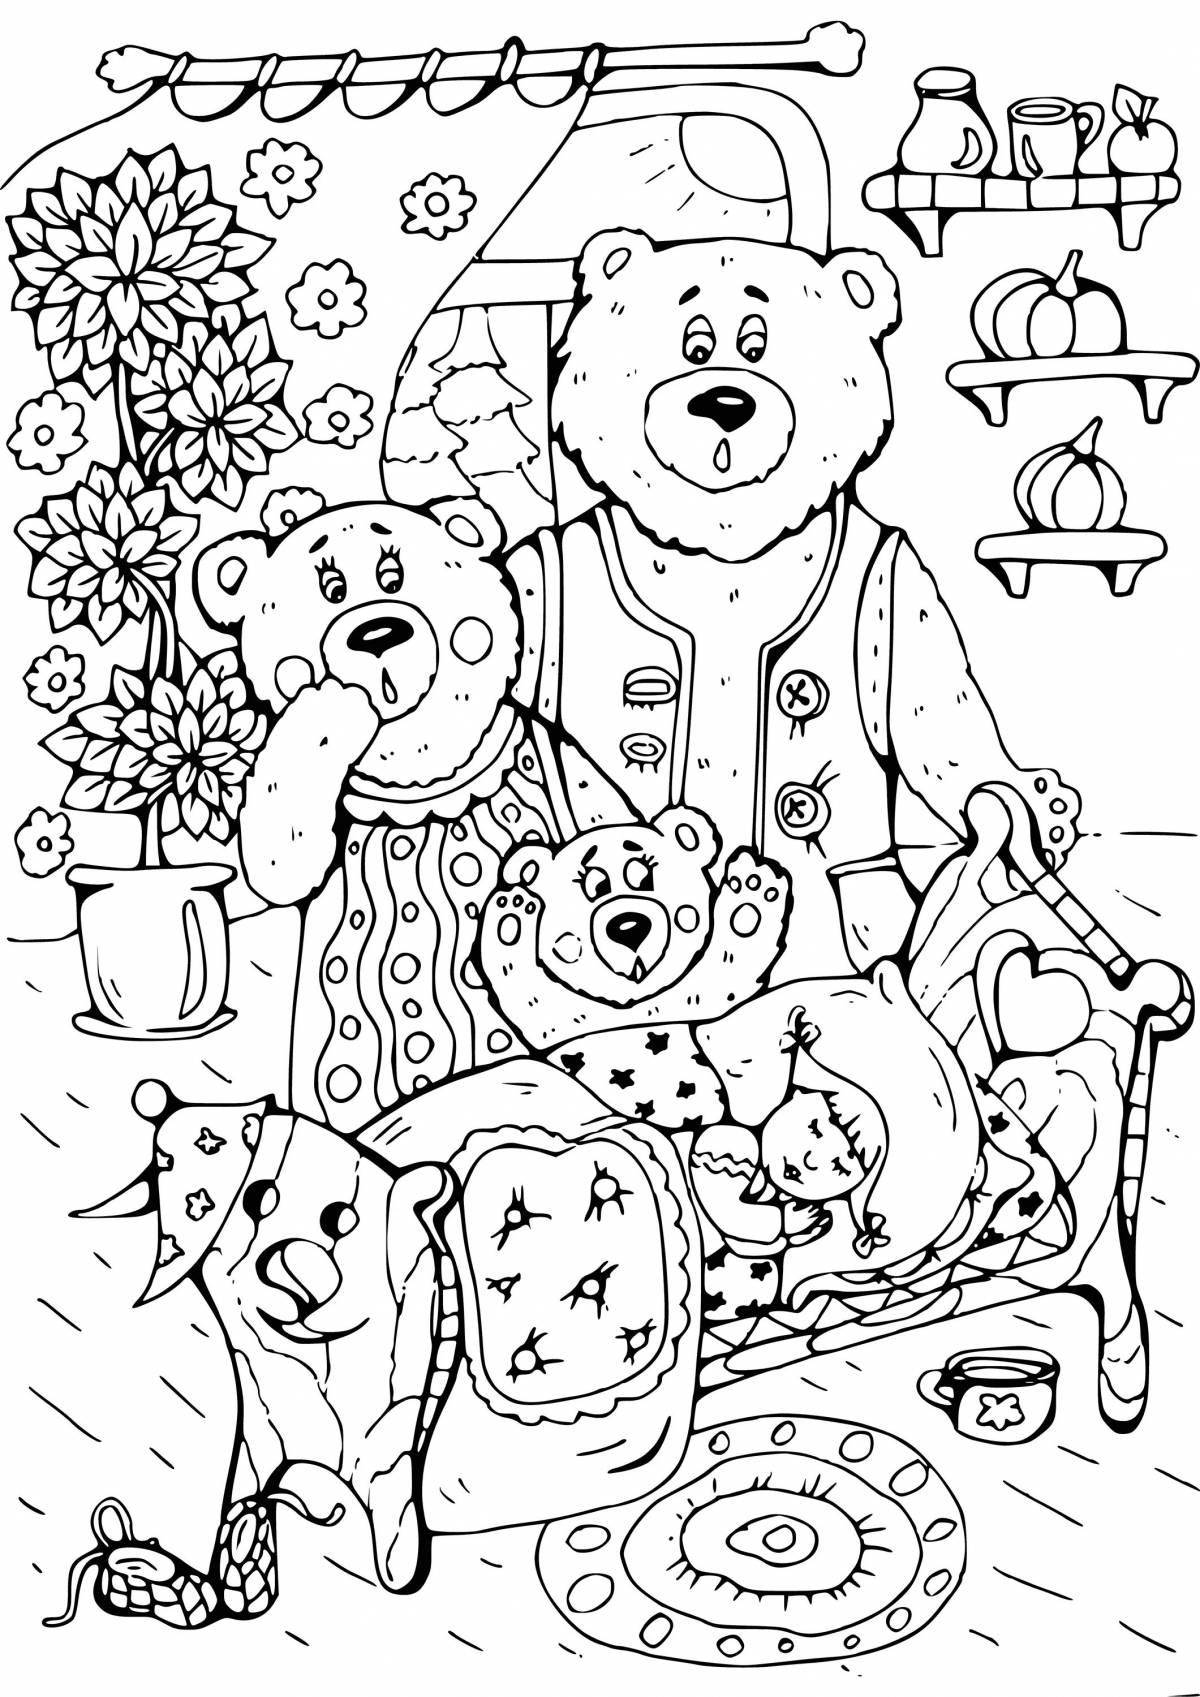 Coloring page adorable bear family